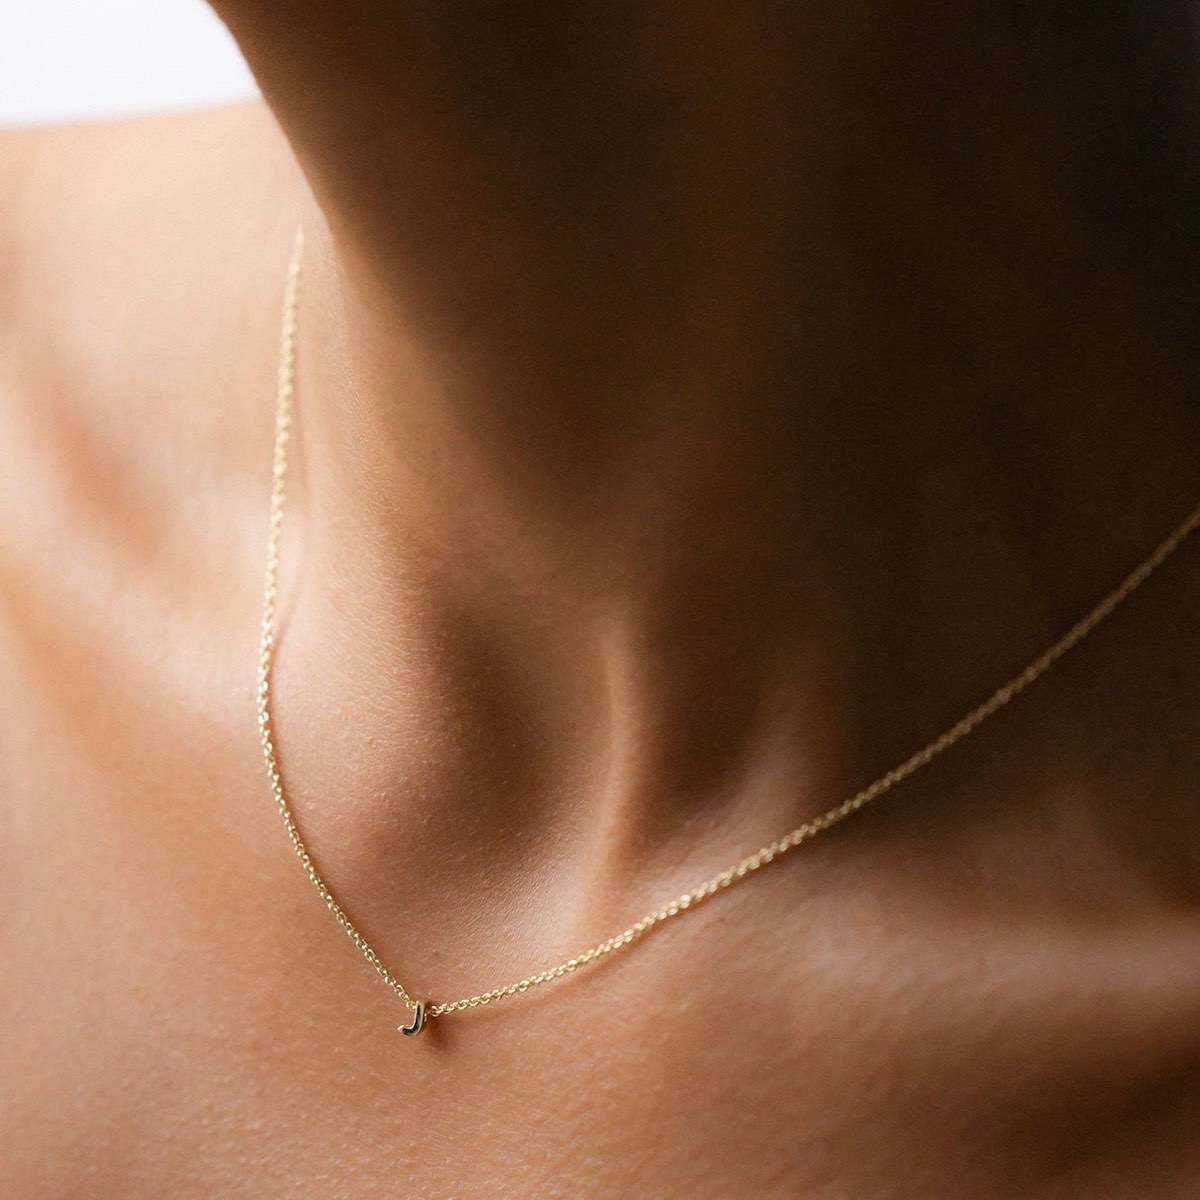 Hand finished solid gold letter necklace: Close up of a model wearing our beautiful 9ct yellow gold Tiny Letter J Charm Necklace with a 40cm cable chain